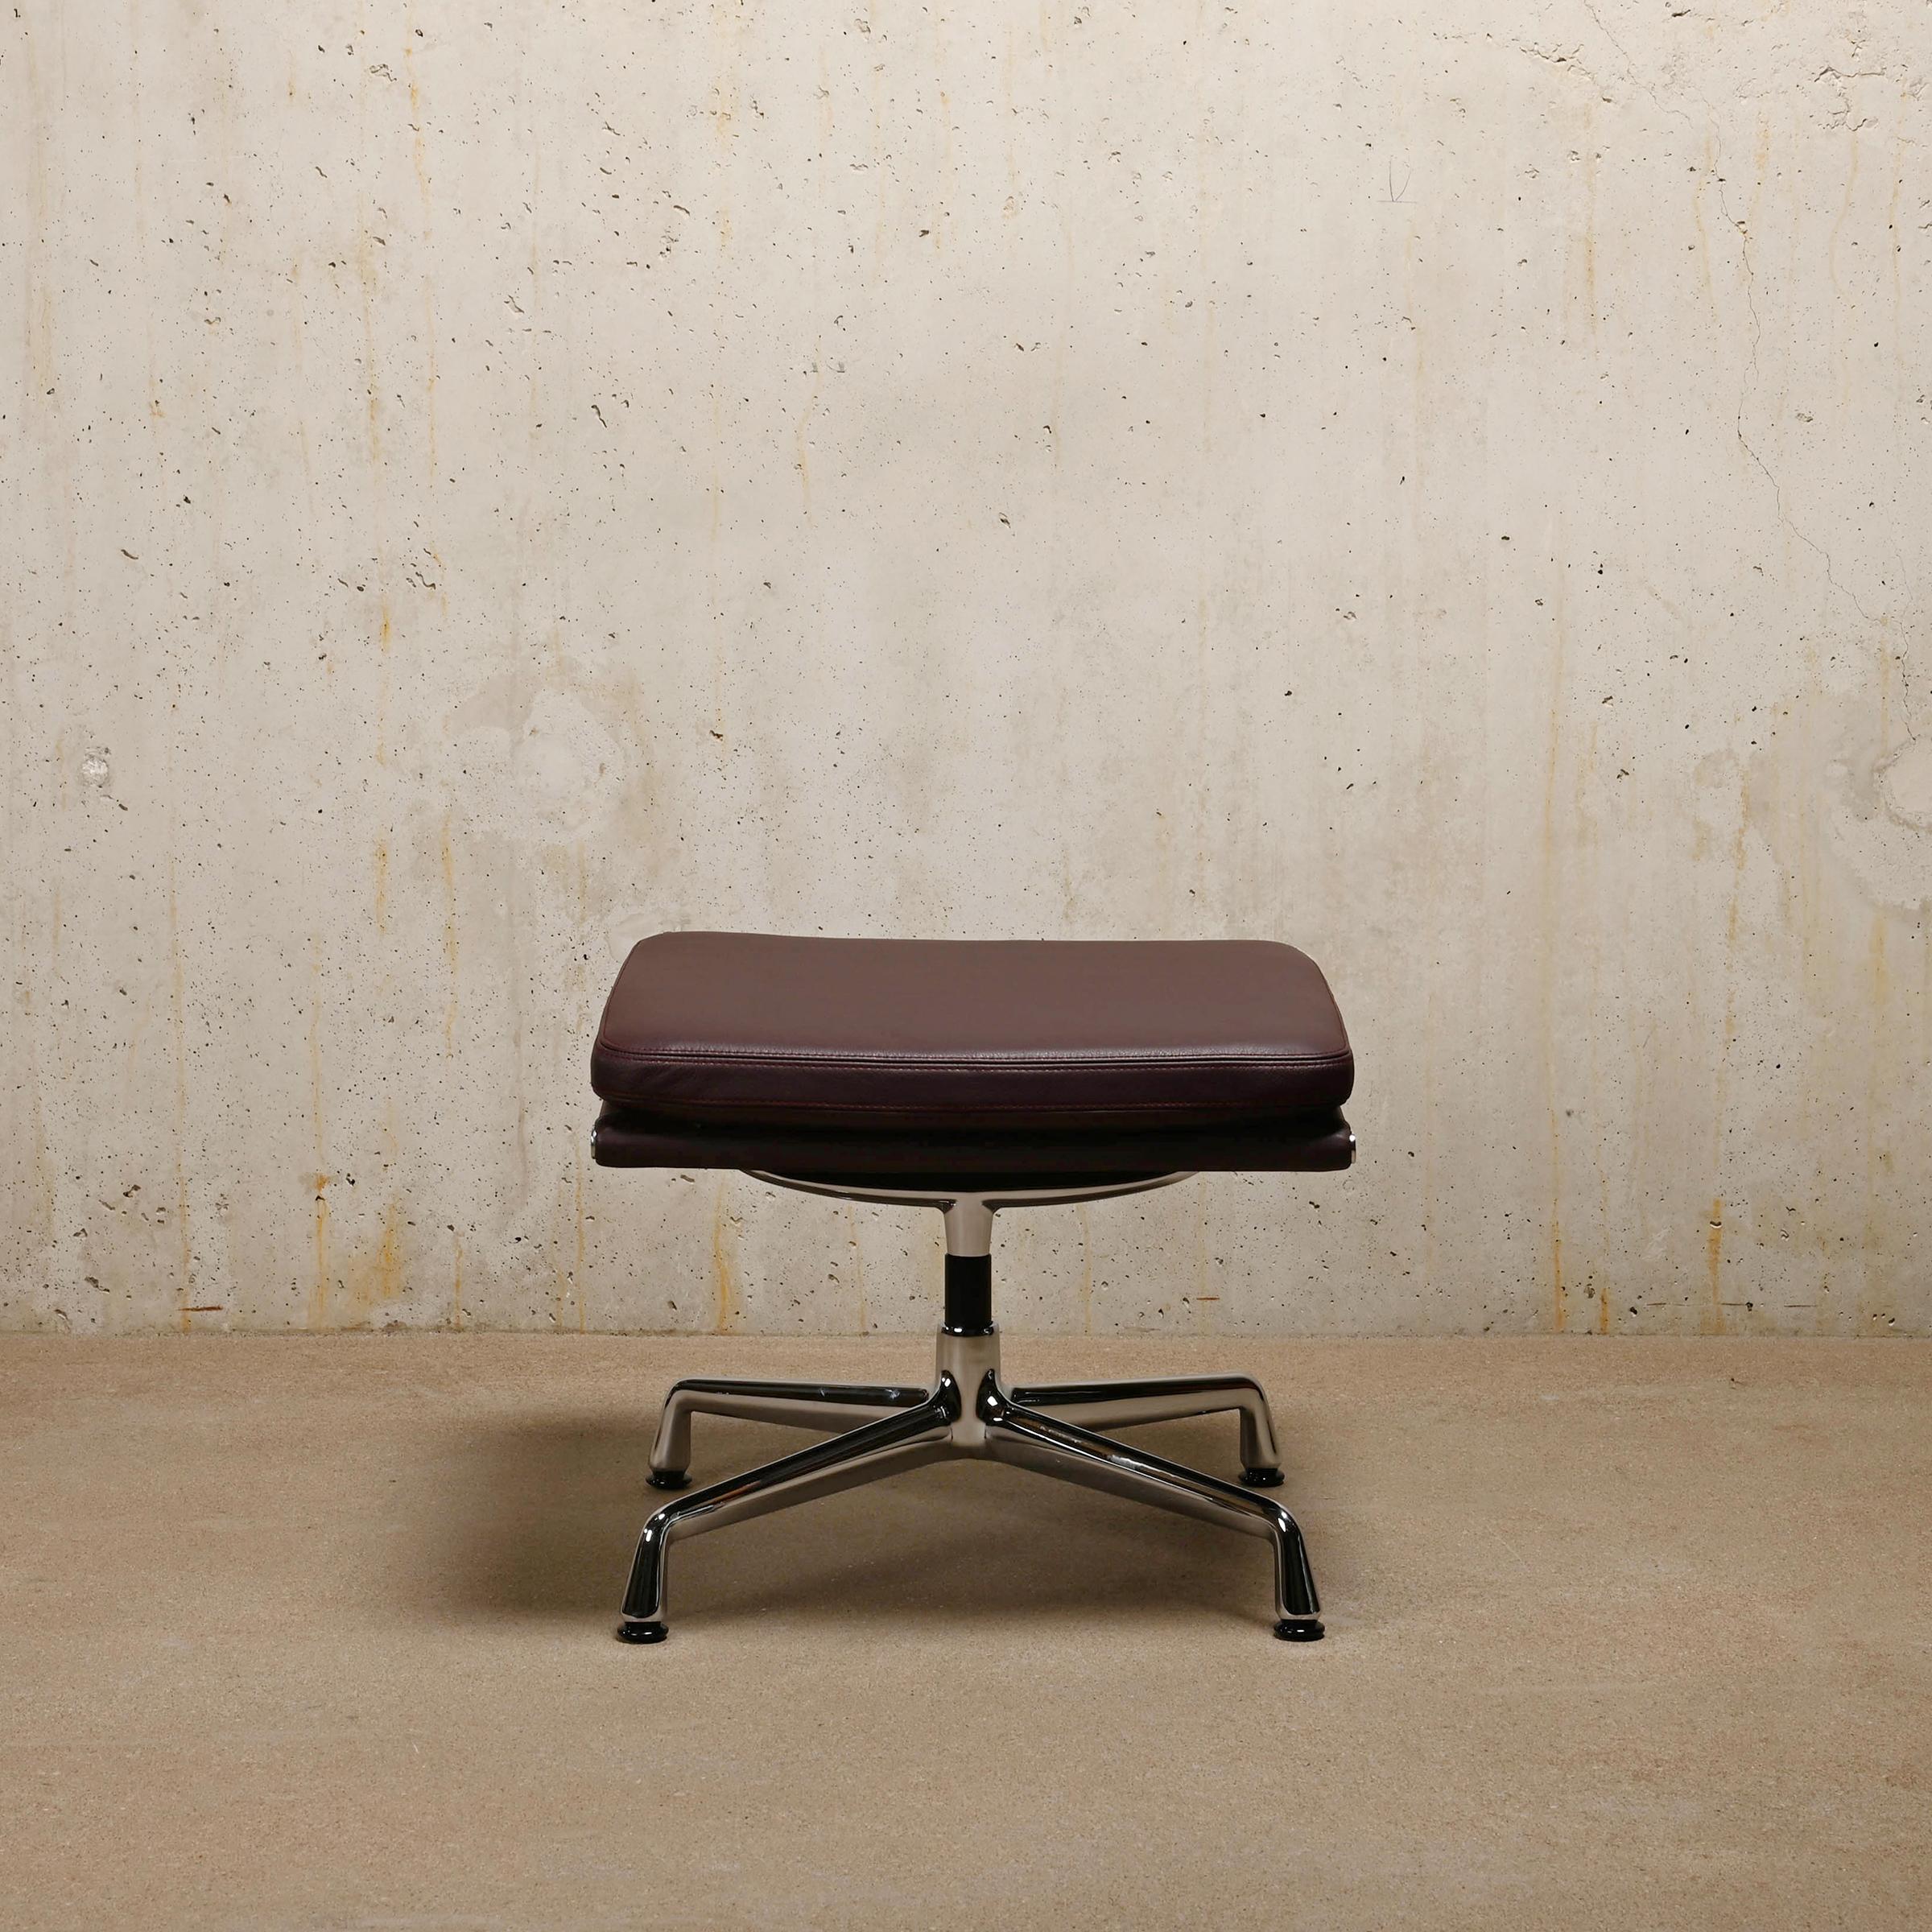 Charles & Ray Eames EA222 Lounge Chair and EA223 Ottoman in Plume Leather, Vitra For Sale 3